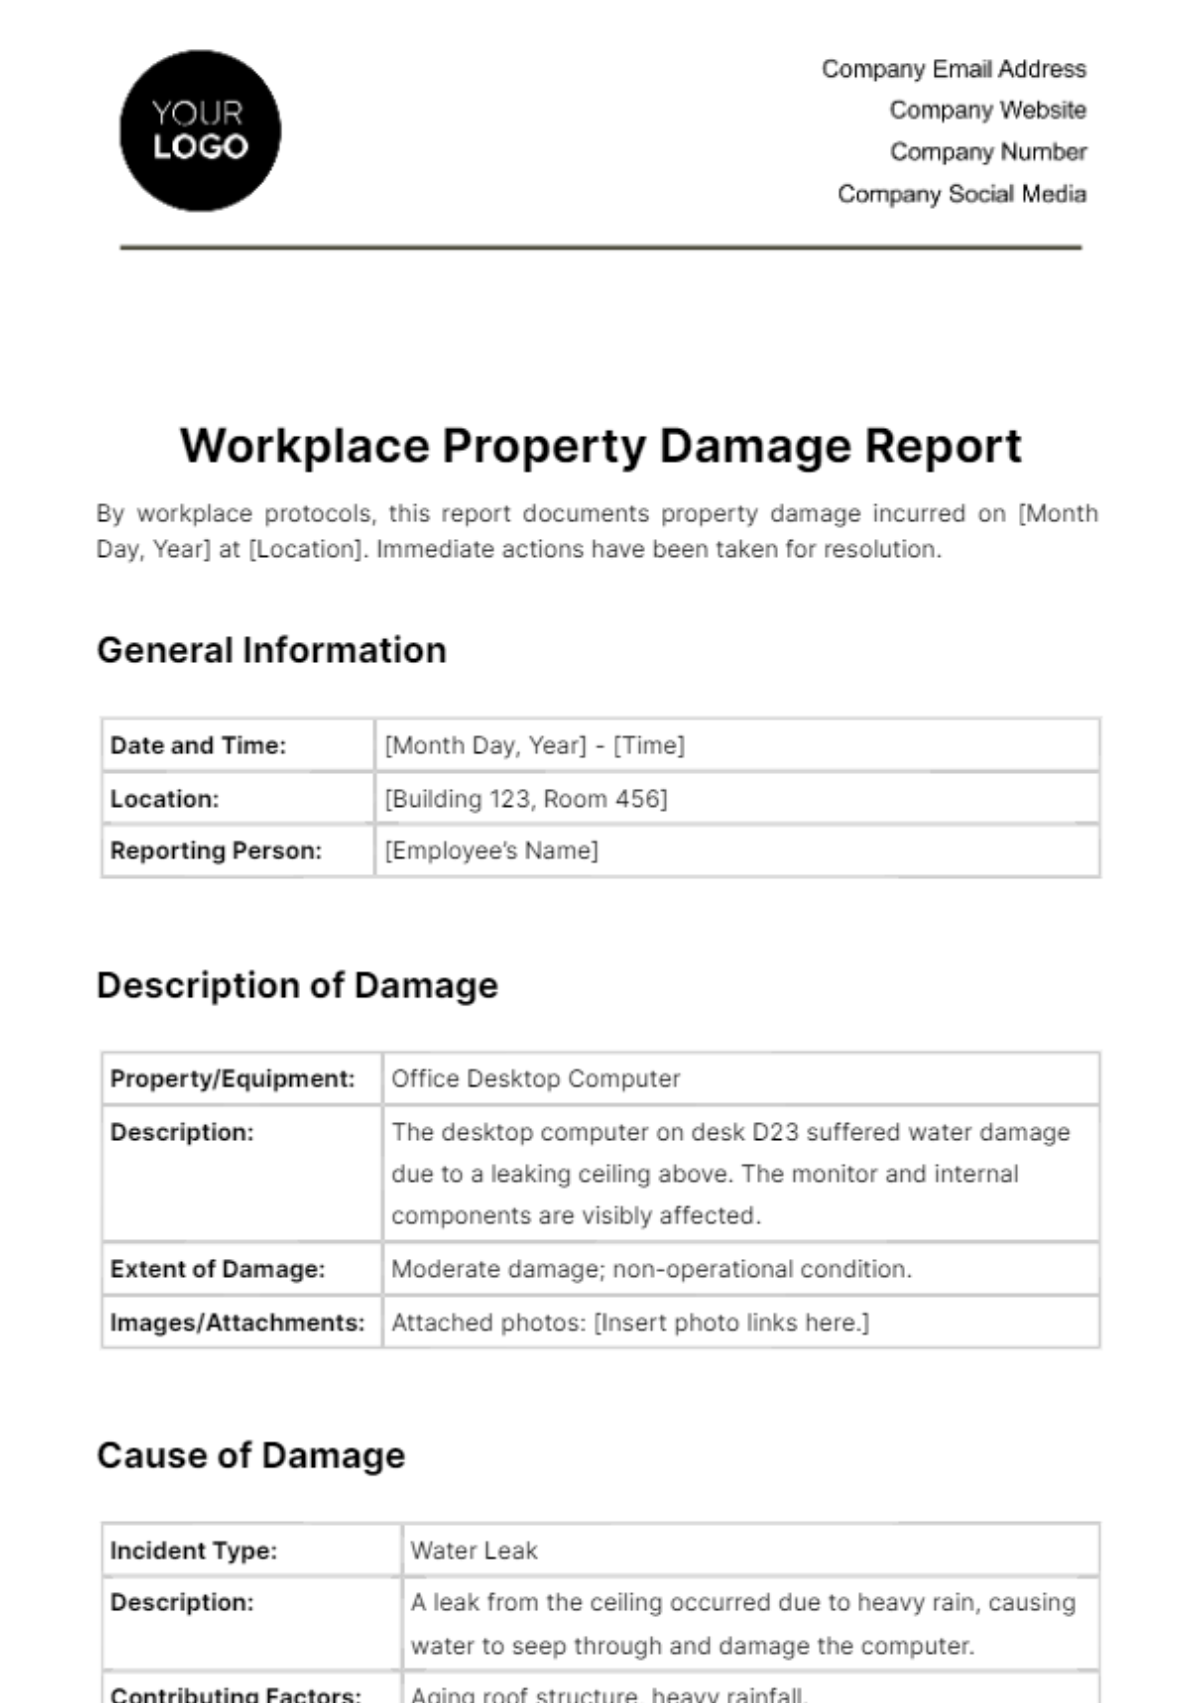 Free Workplace Property Damage Report Template